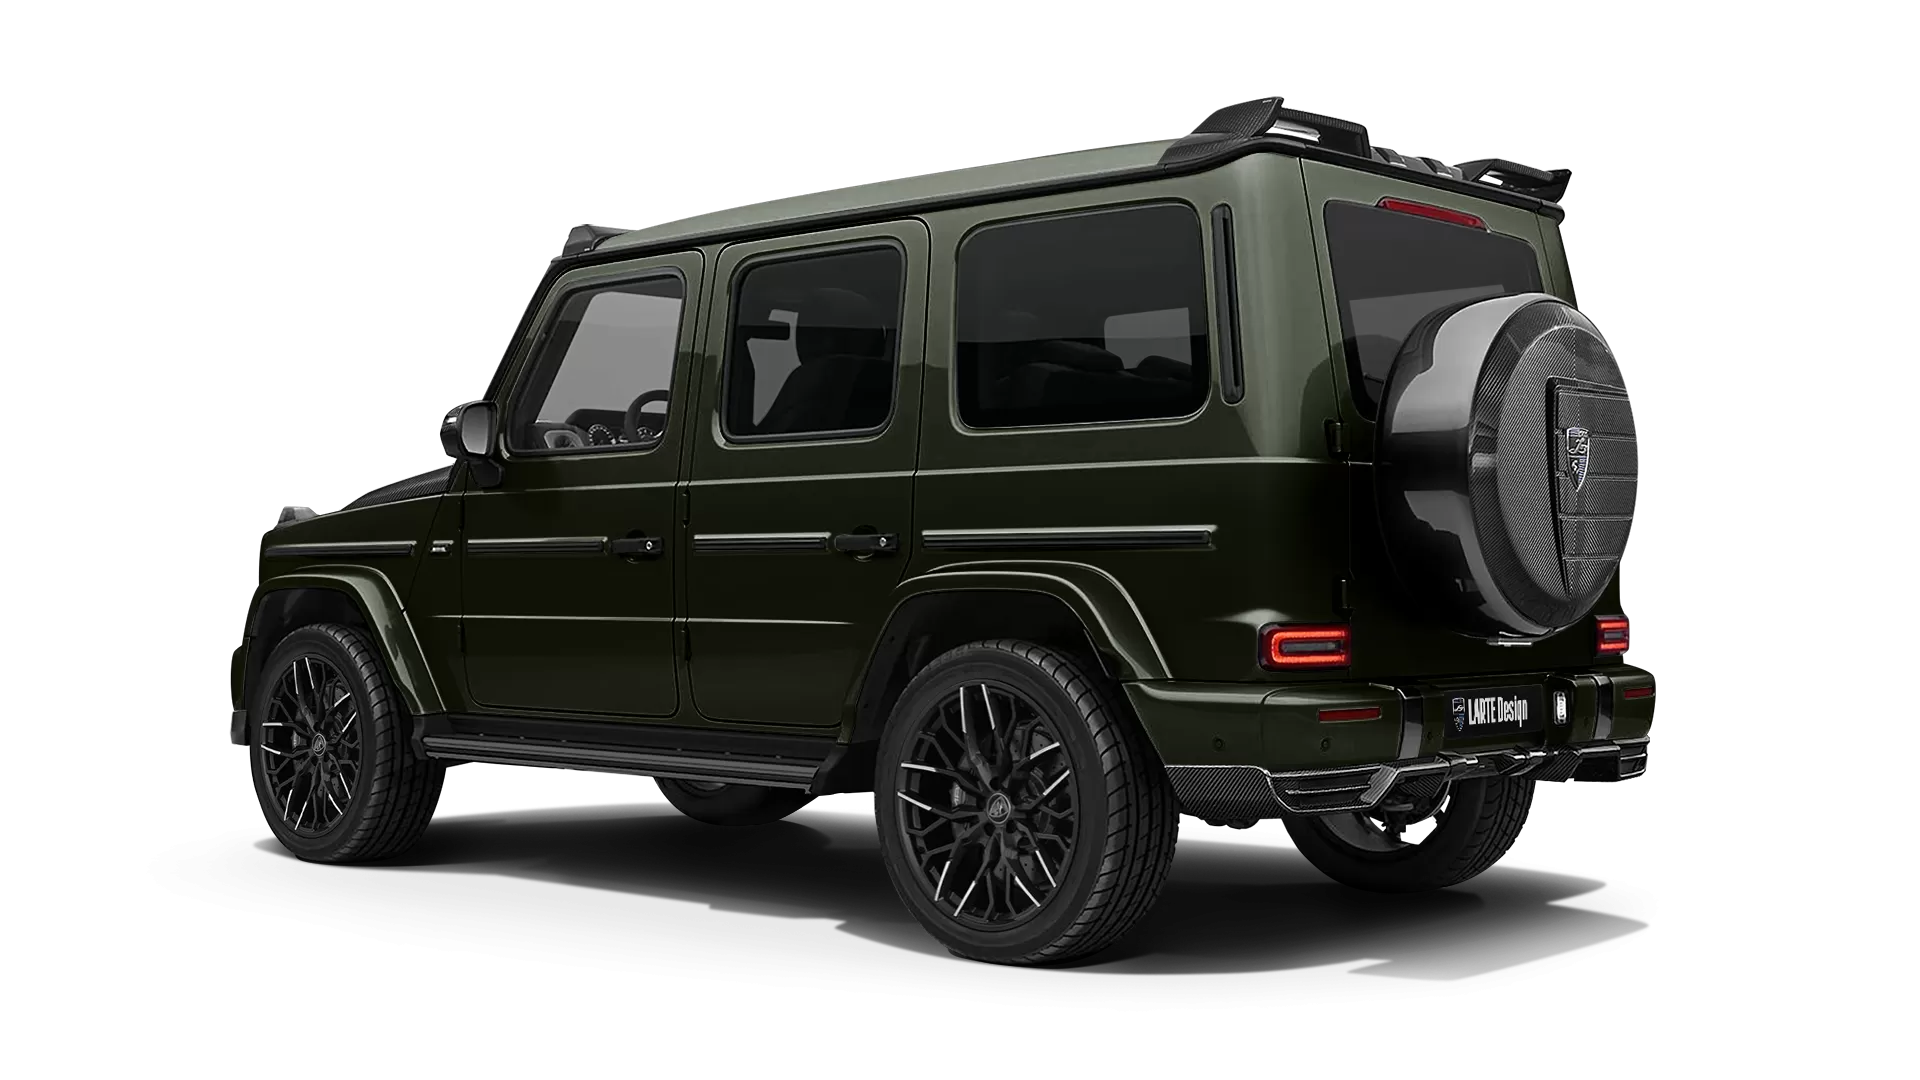 Mercedes G class W463 with carbon body kit: back view shown in Dark Olive